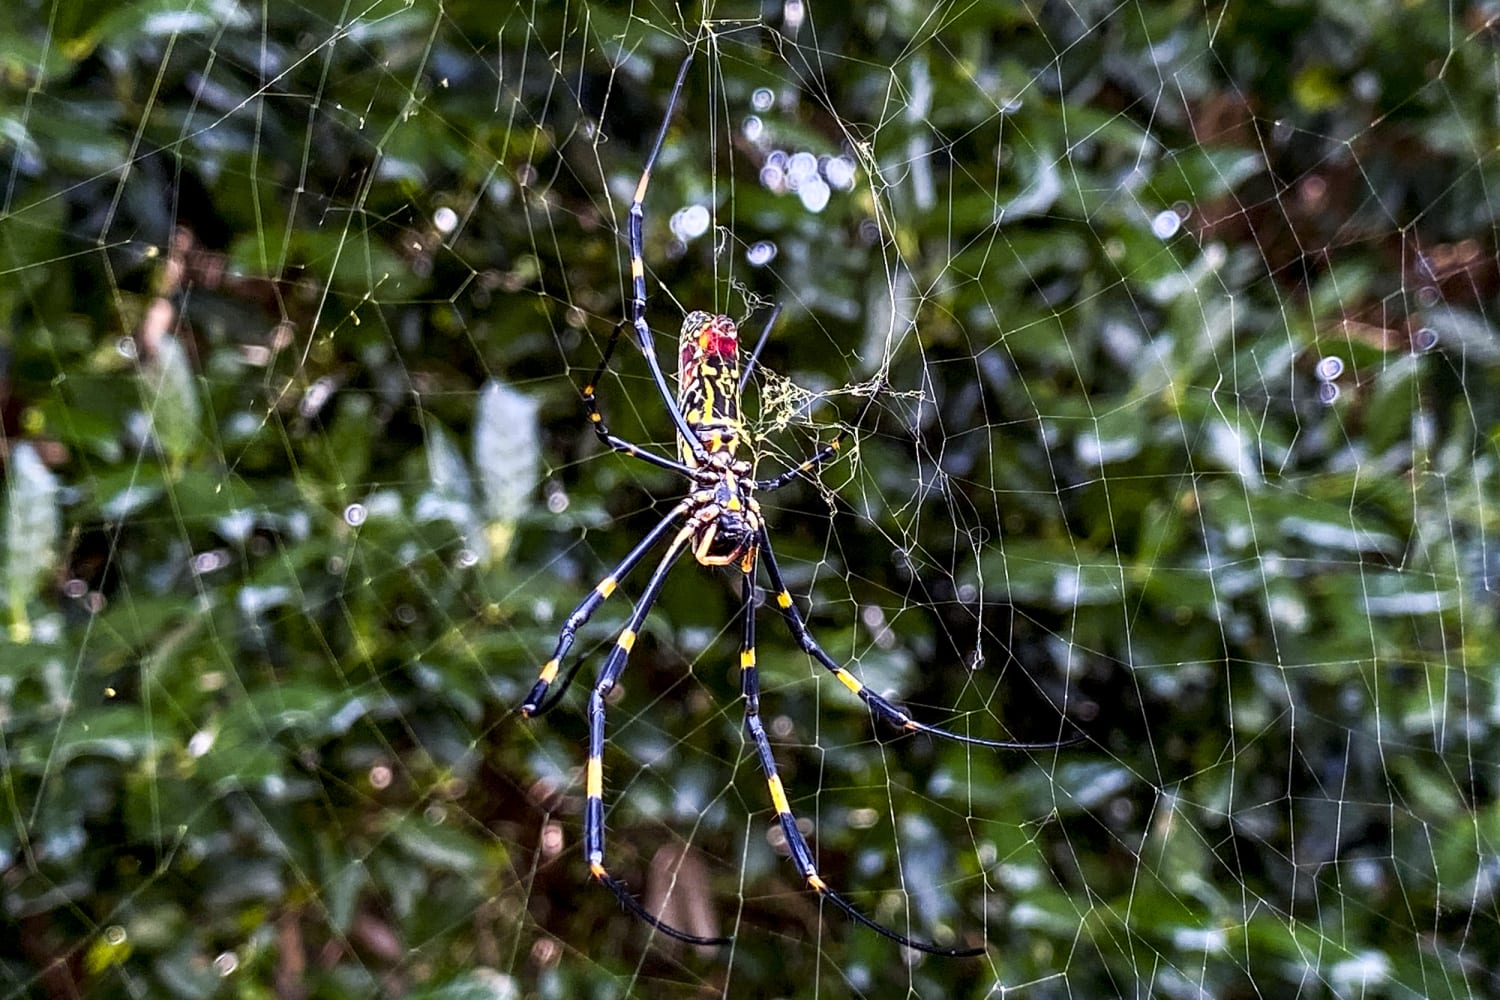 Why Spiders Are A Year-Round Problem In South Carolina